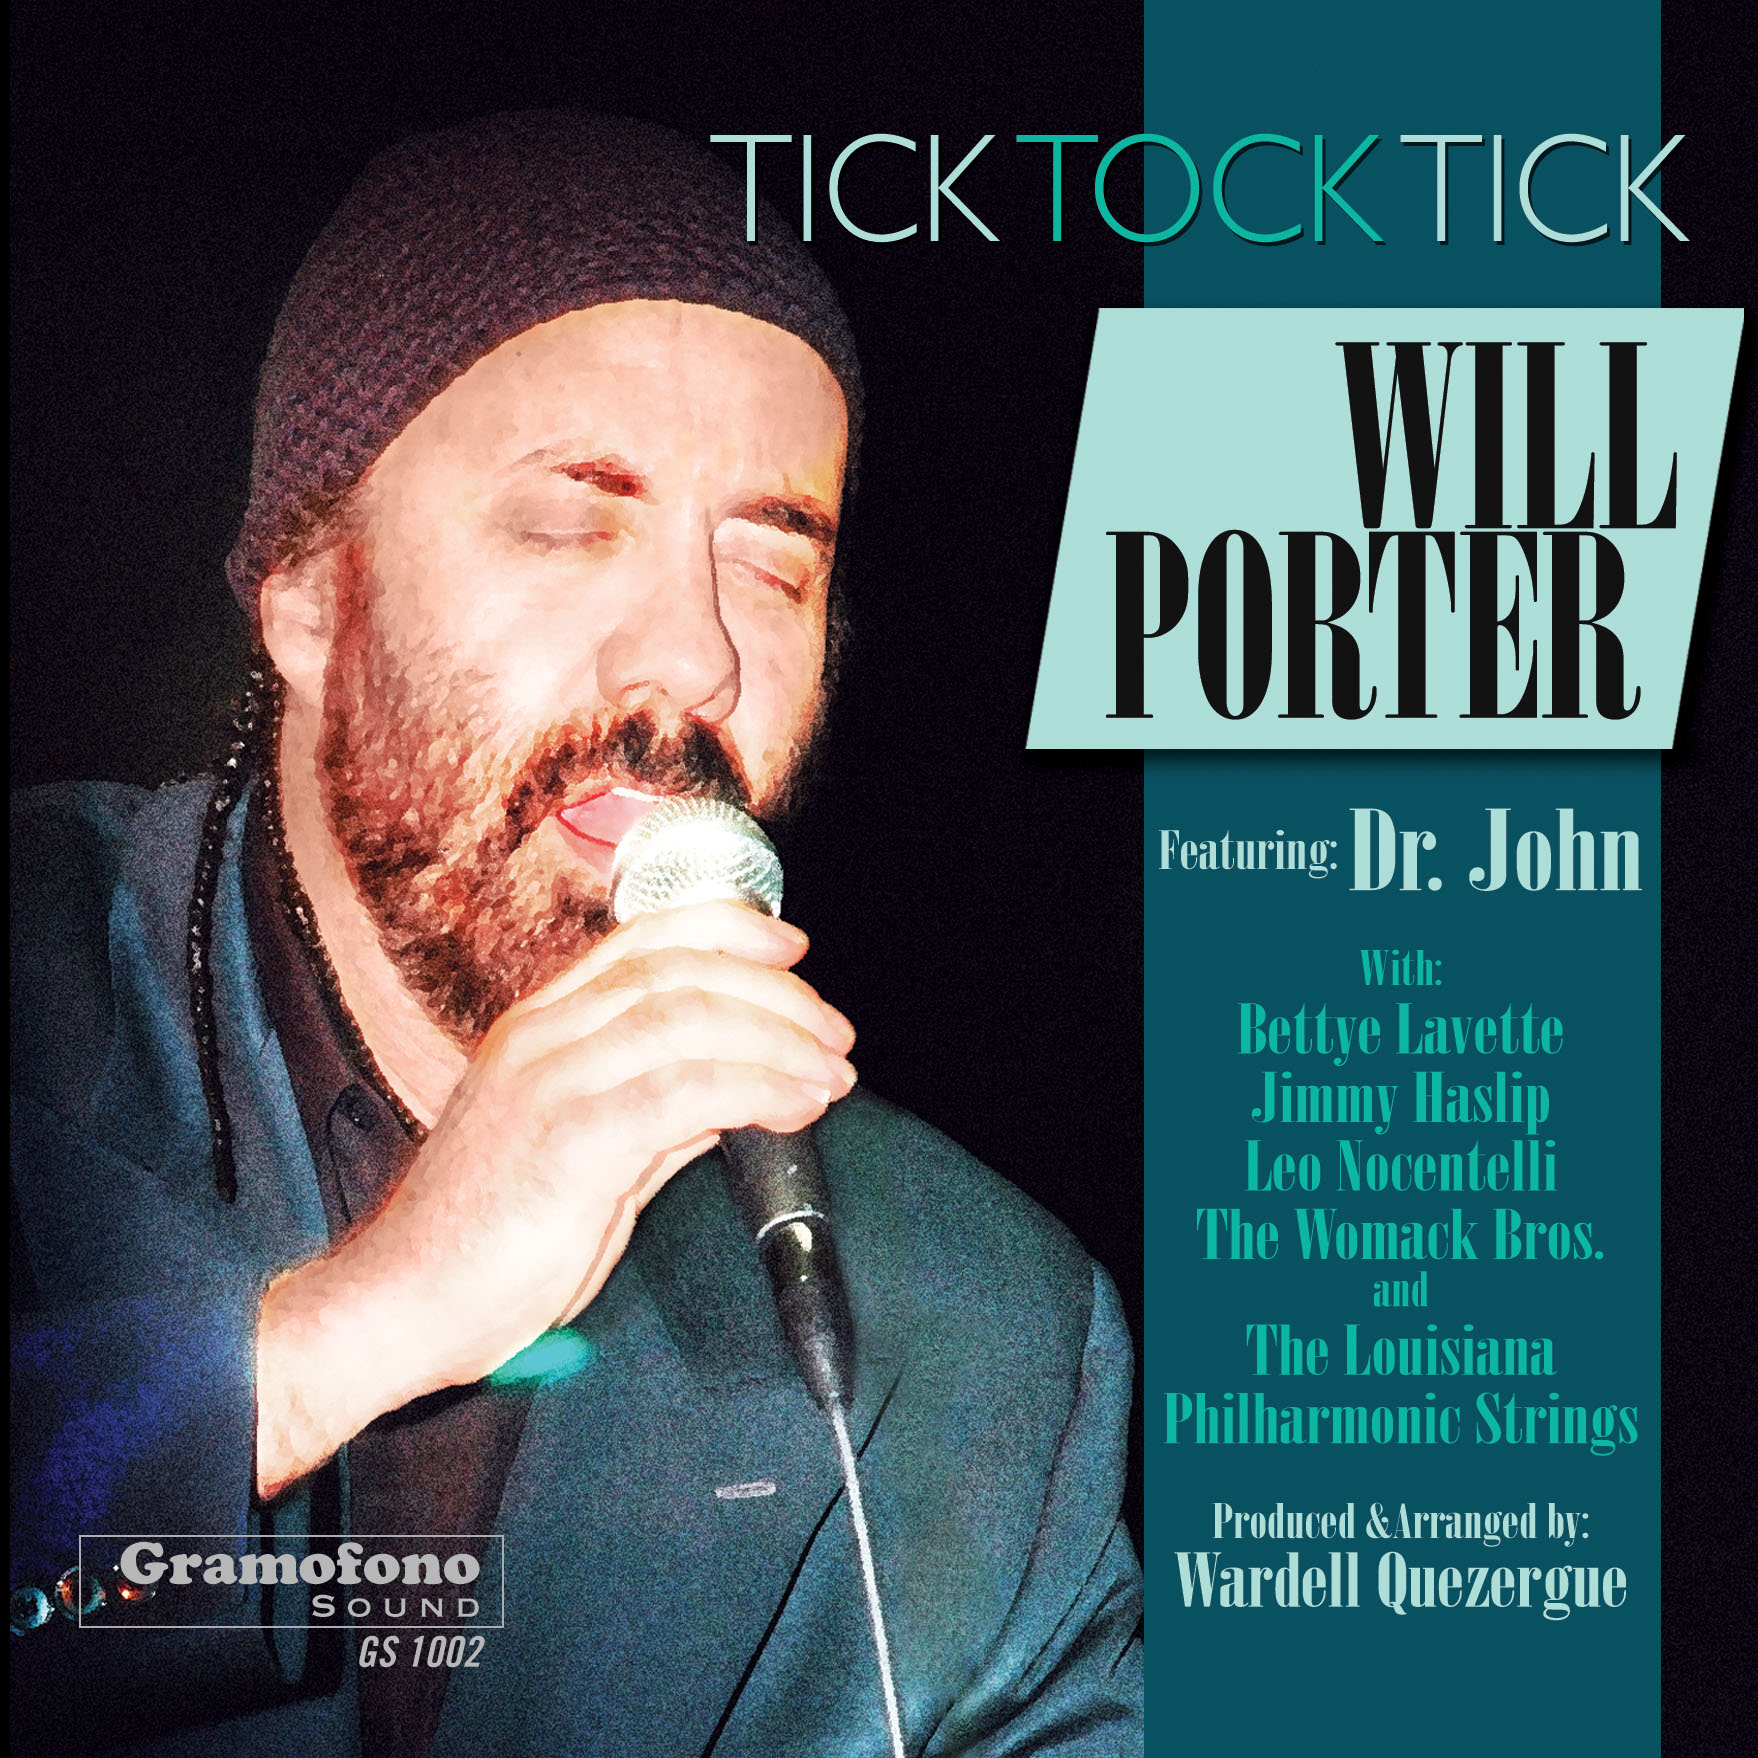 Will Porter Set to Reissue His Lauded CD, "Tick Tock Tick," April 16